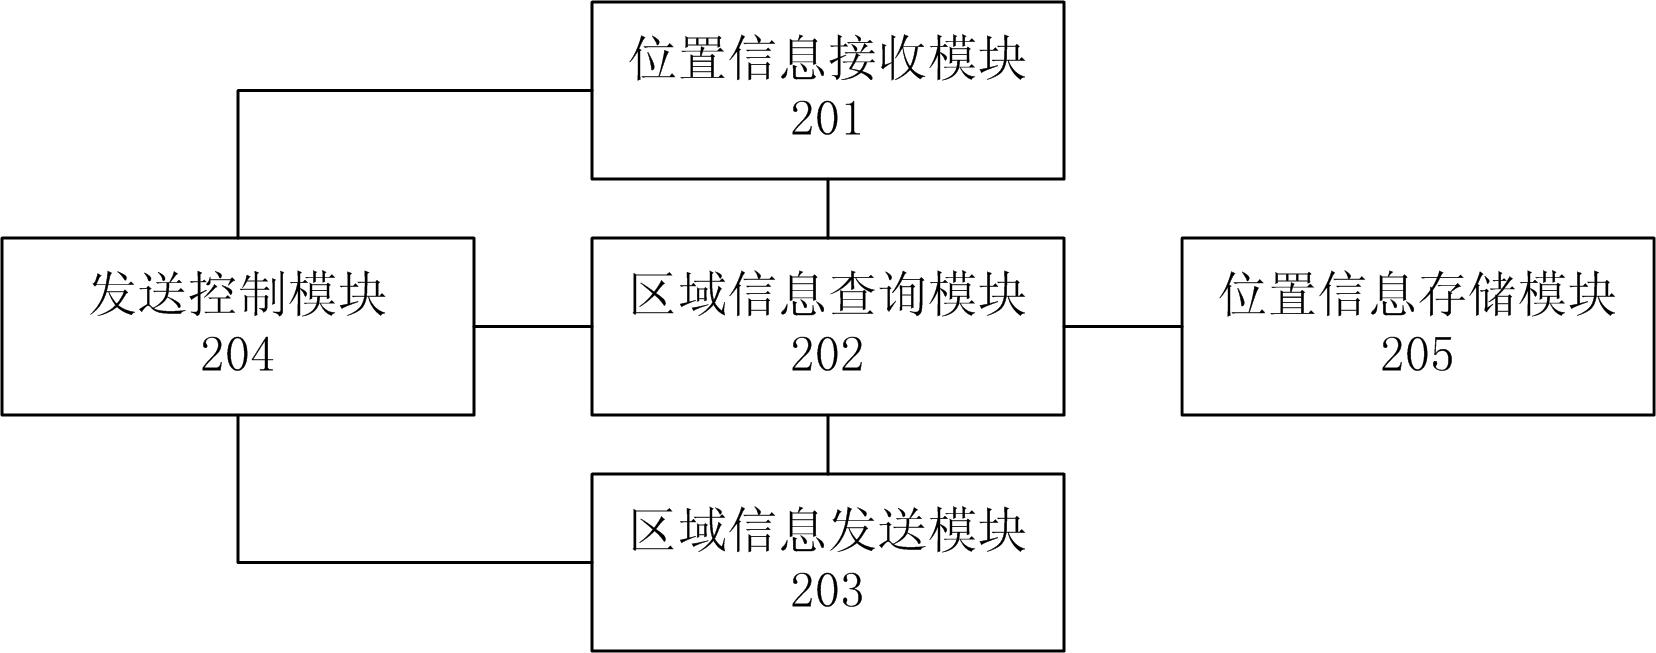 Mobile terminal-based taxi calling system and method